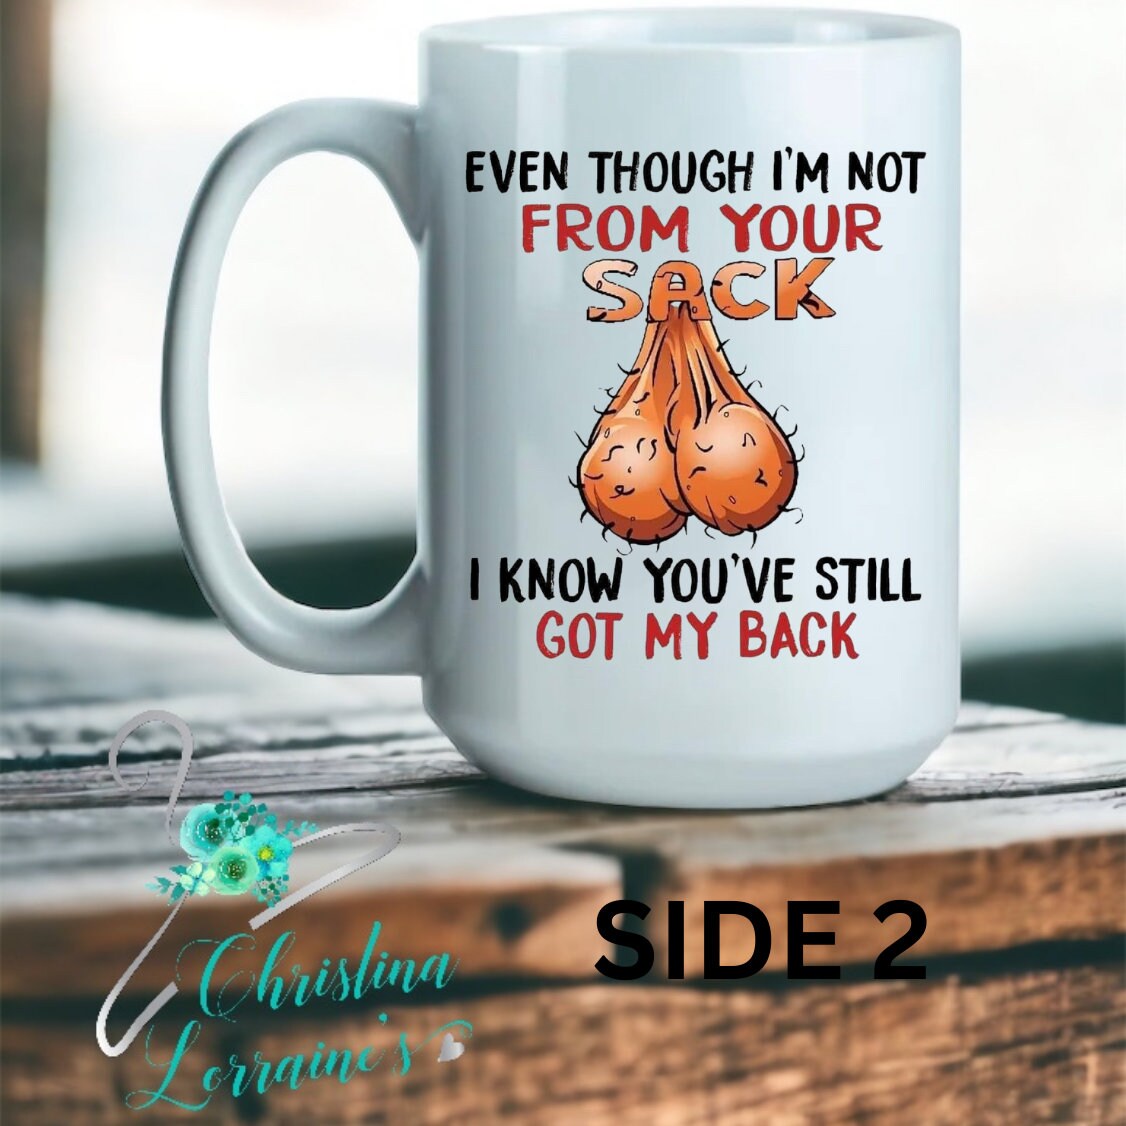 From The Kid You Inherited/Double Sided Word Art Design Coffee Mug